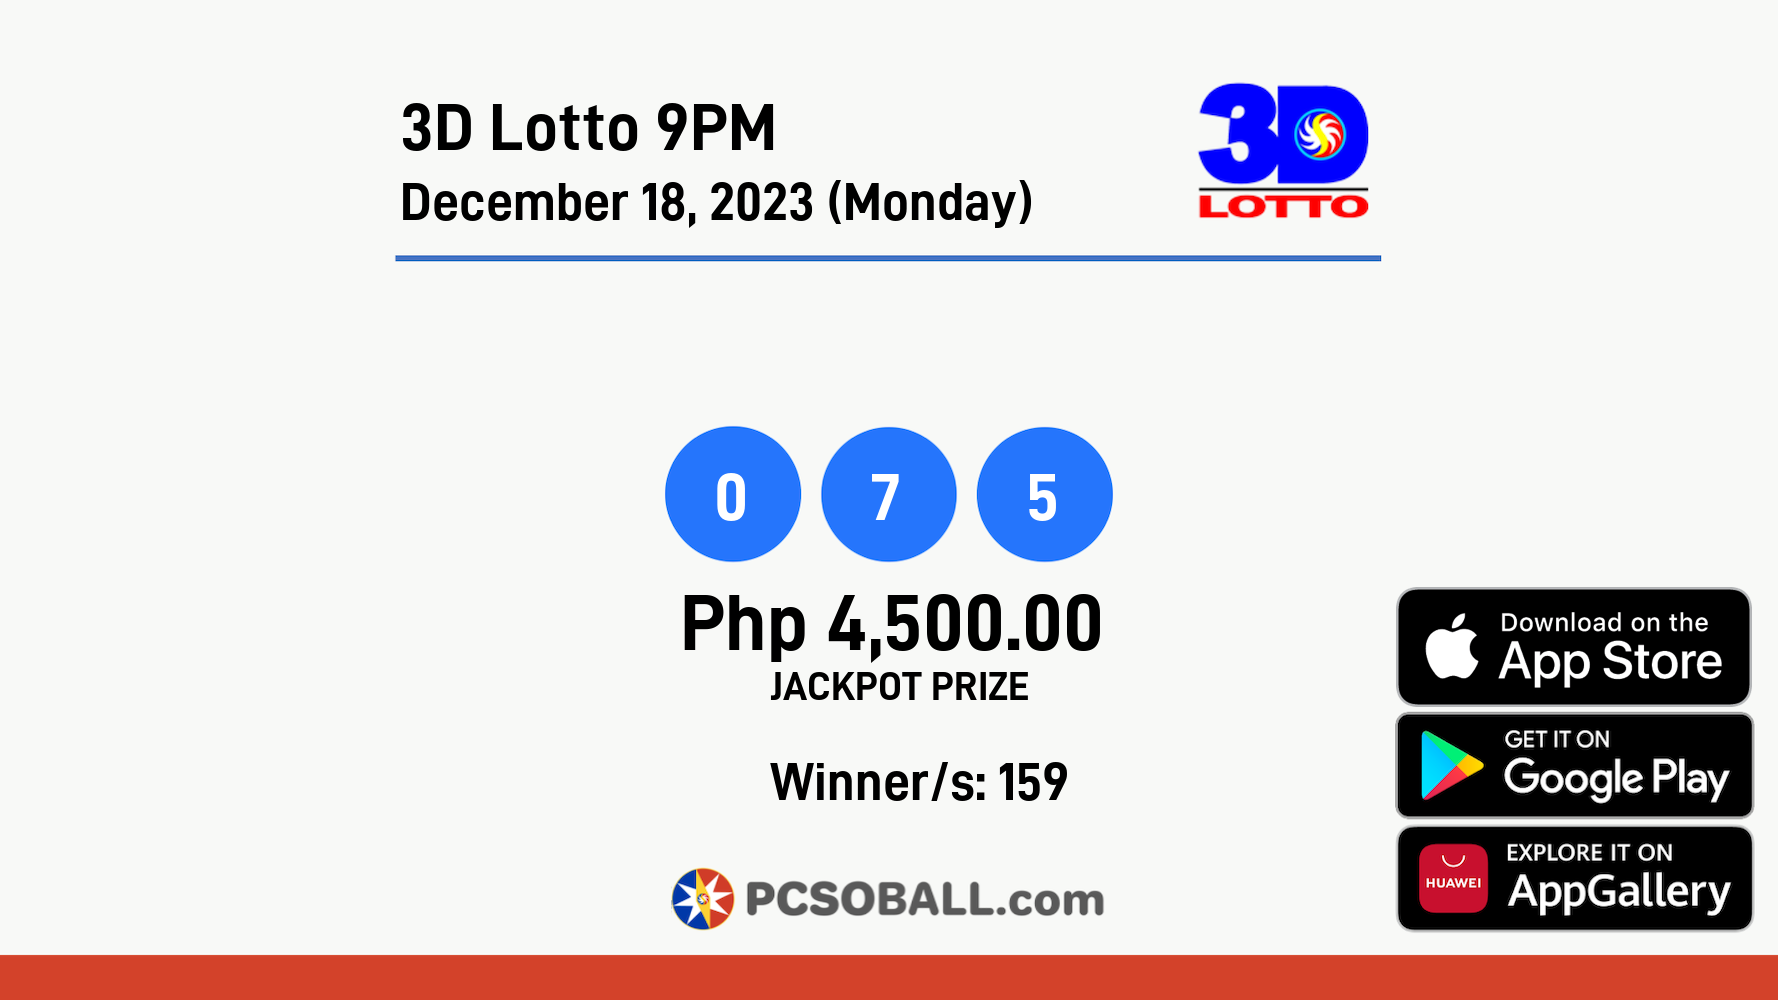 3D Lotto 9PM December 18, 2023 (Monday) Result